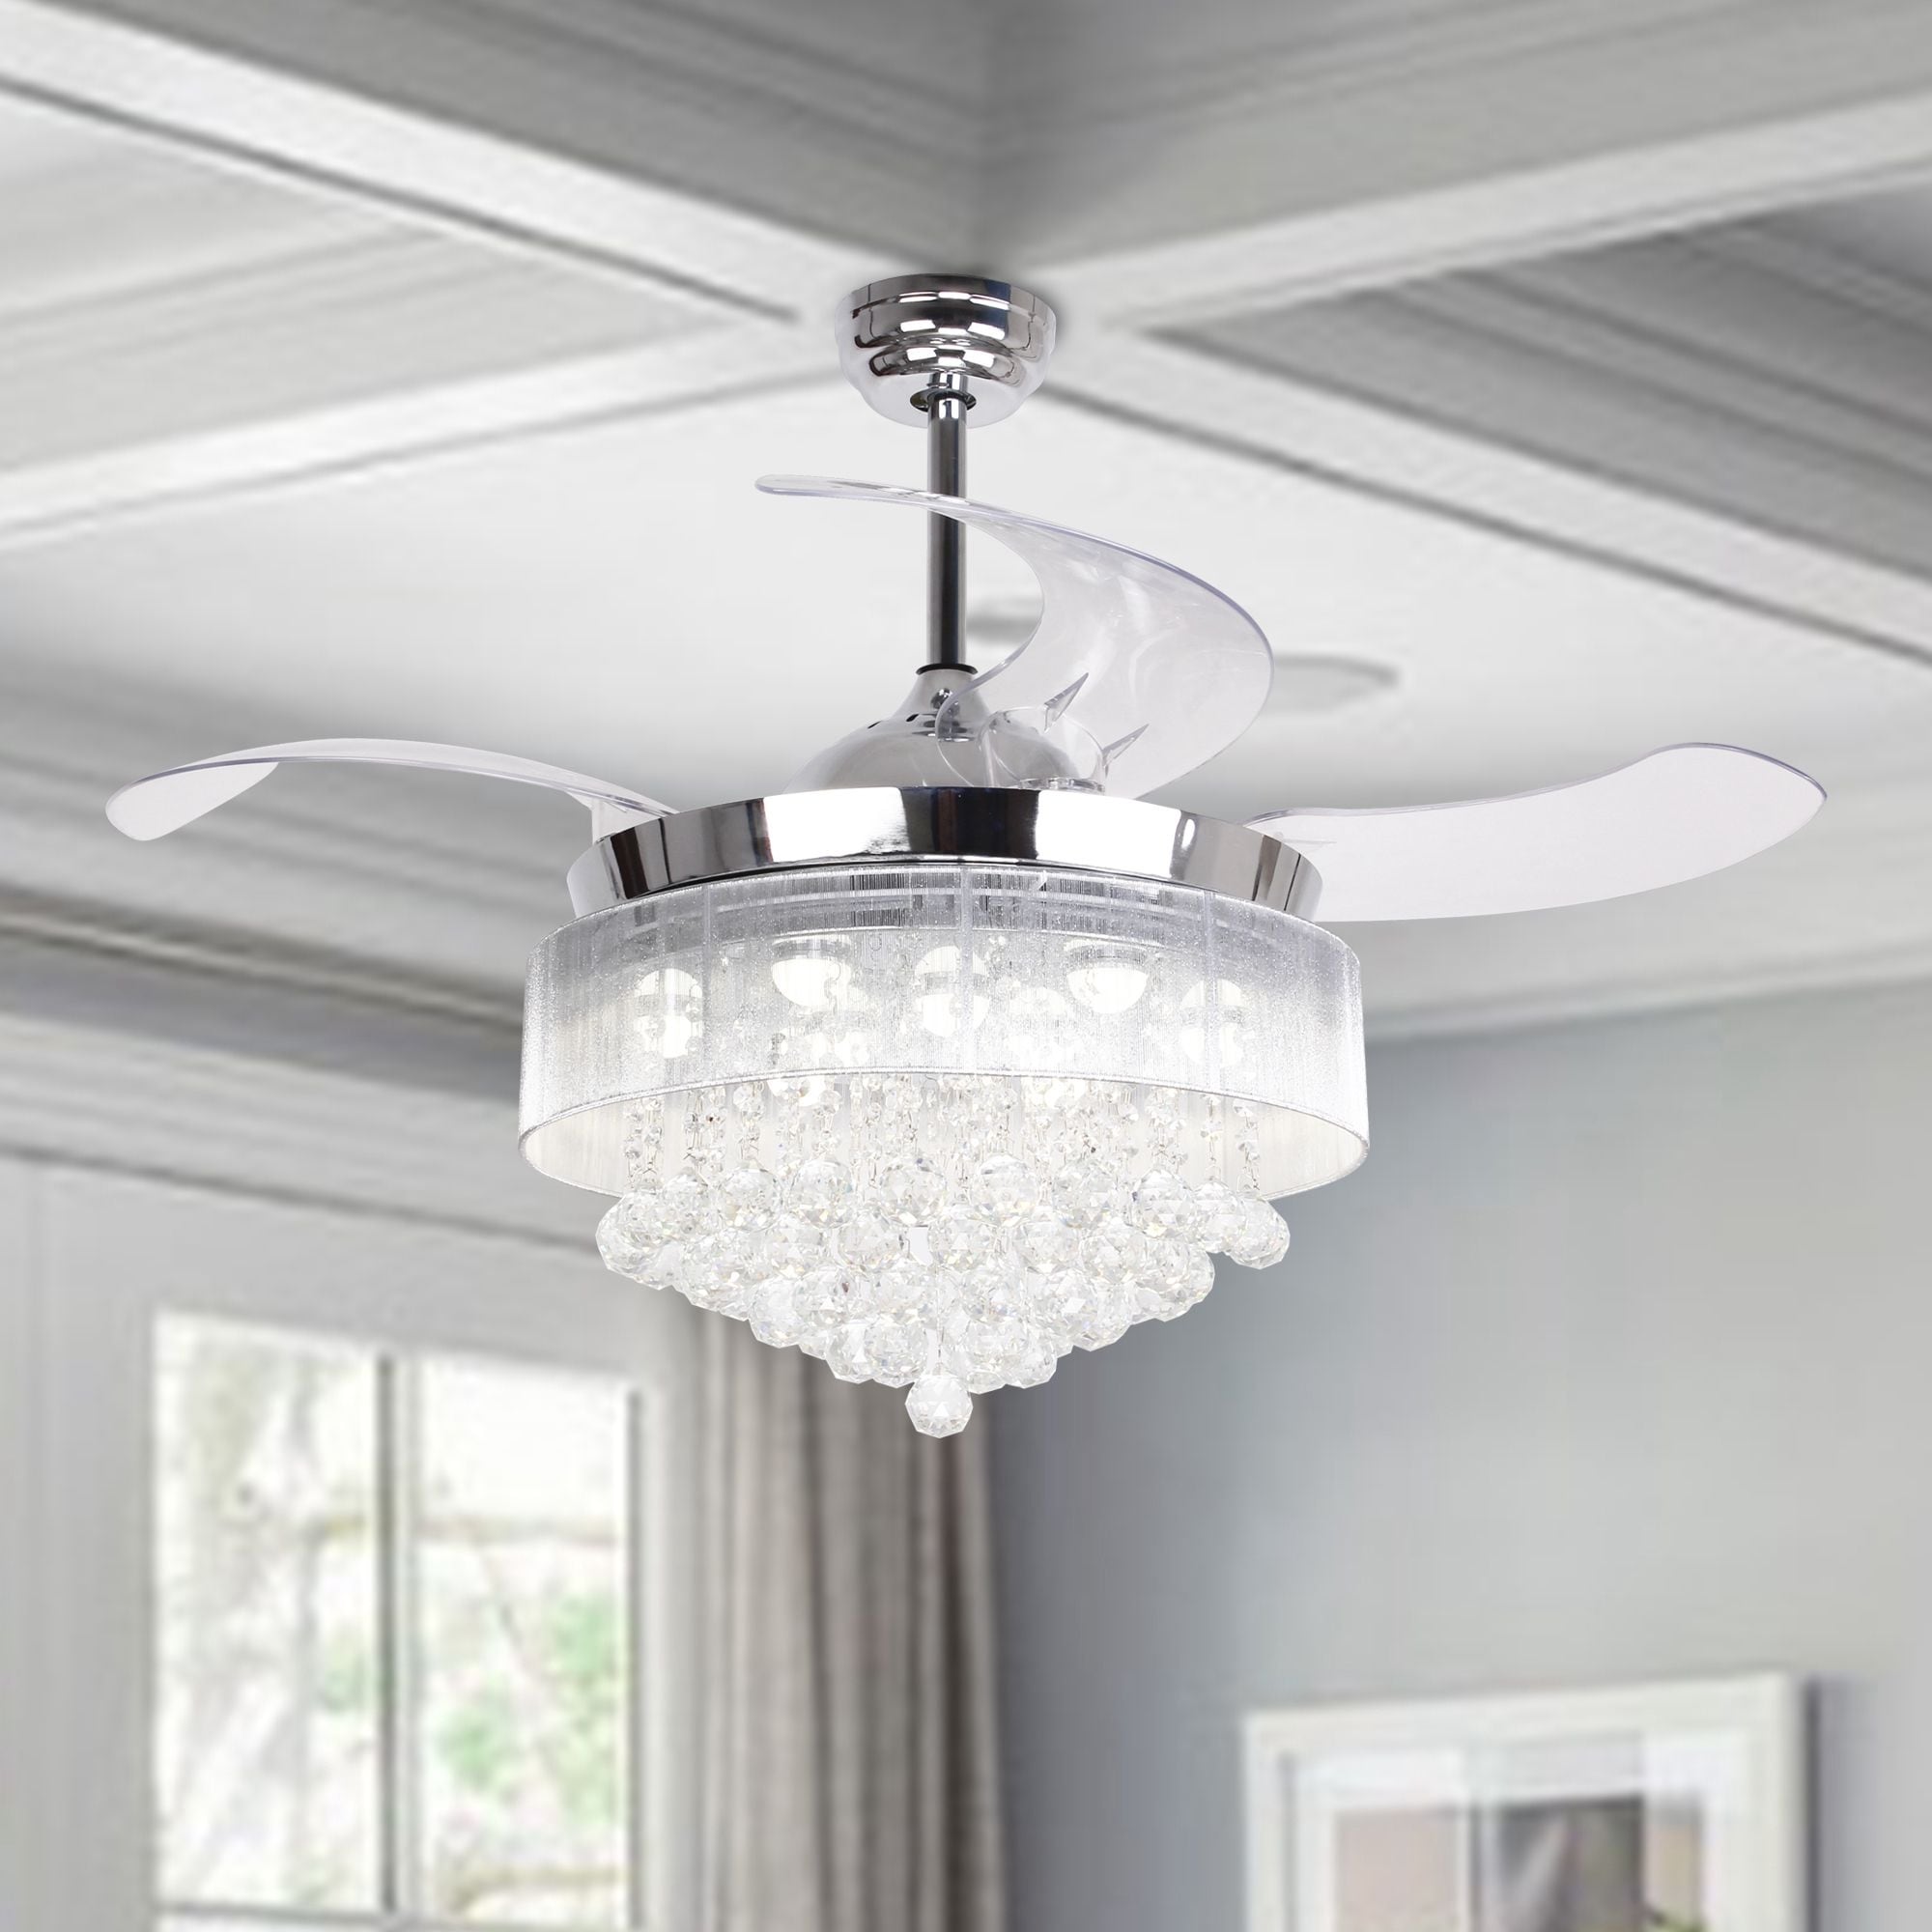 46" Modern Ceiling Fan Light and Remote Control Retractable Chandelier Fan,White 